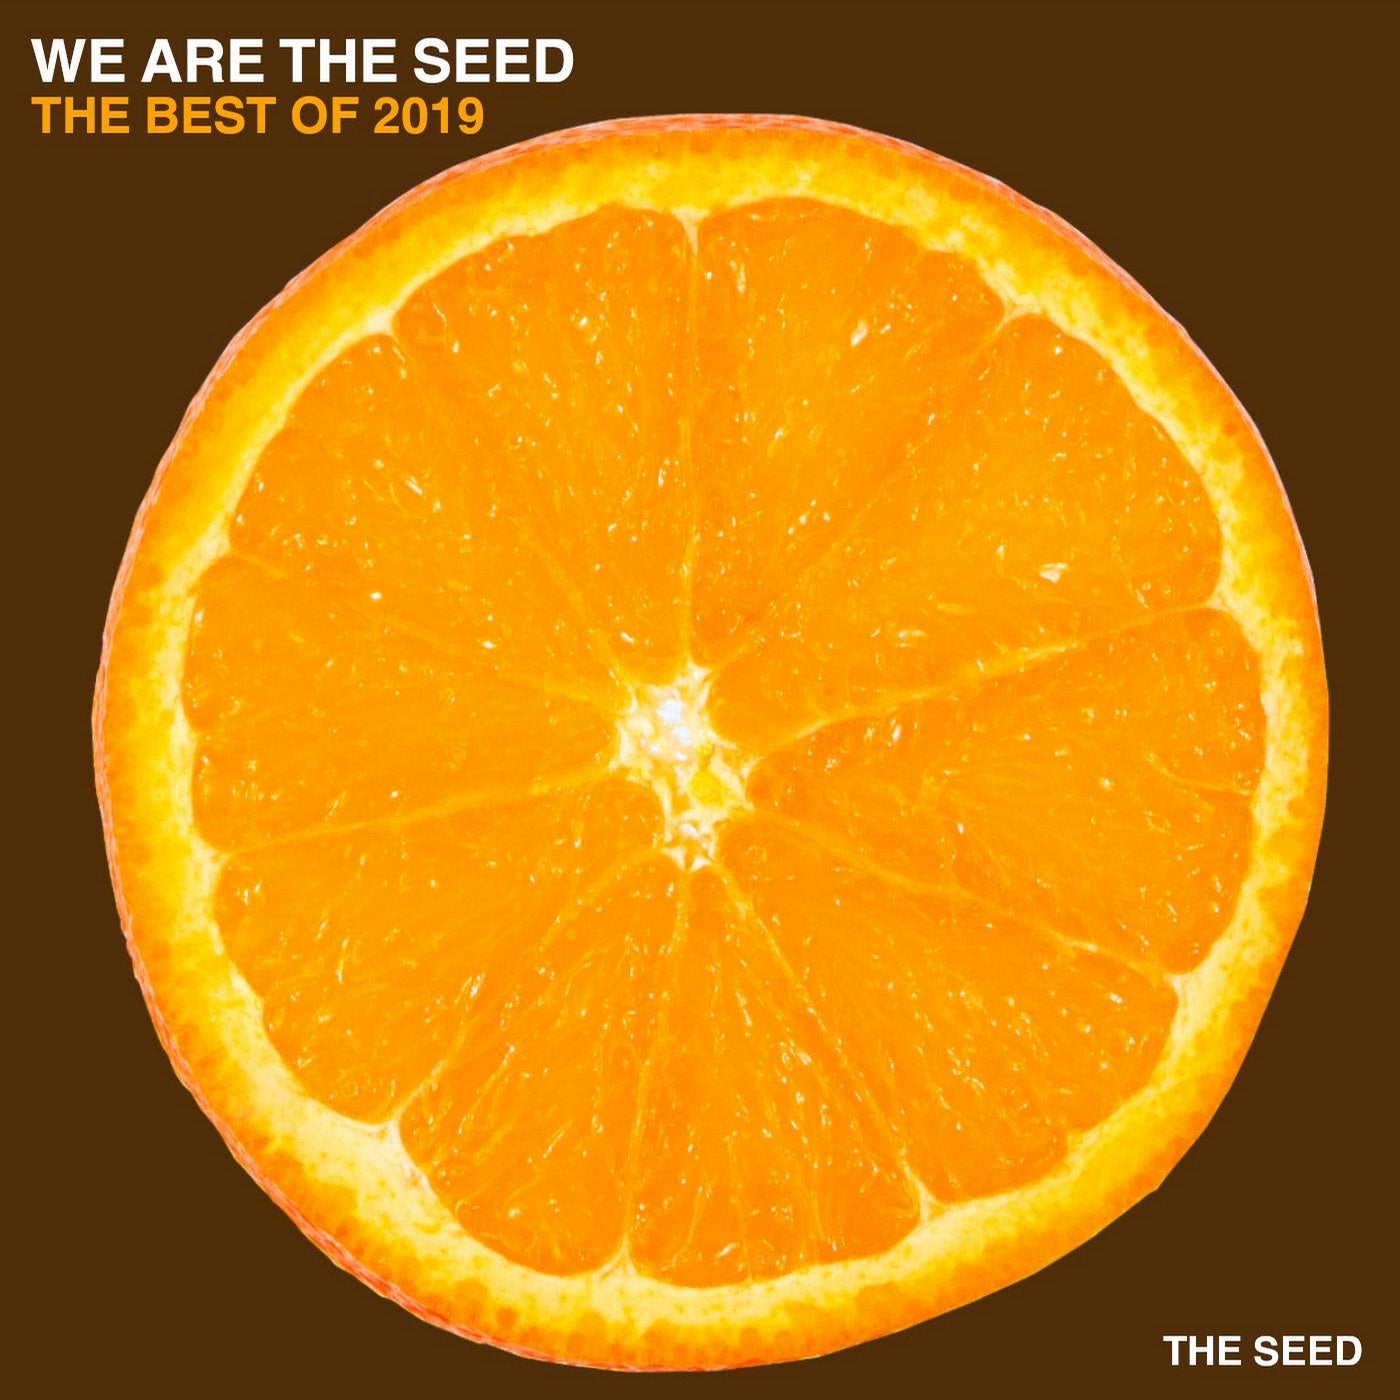 We are the Seed